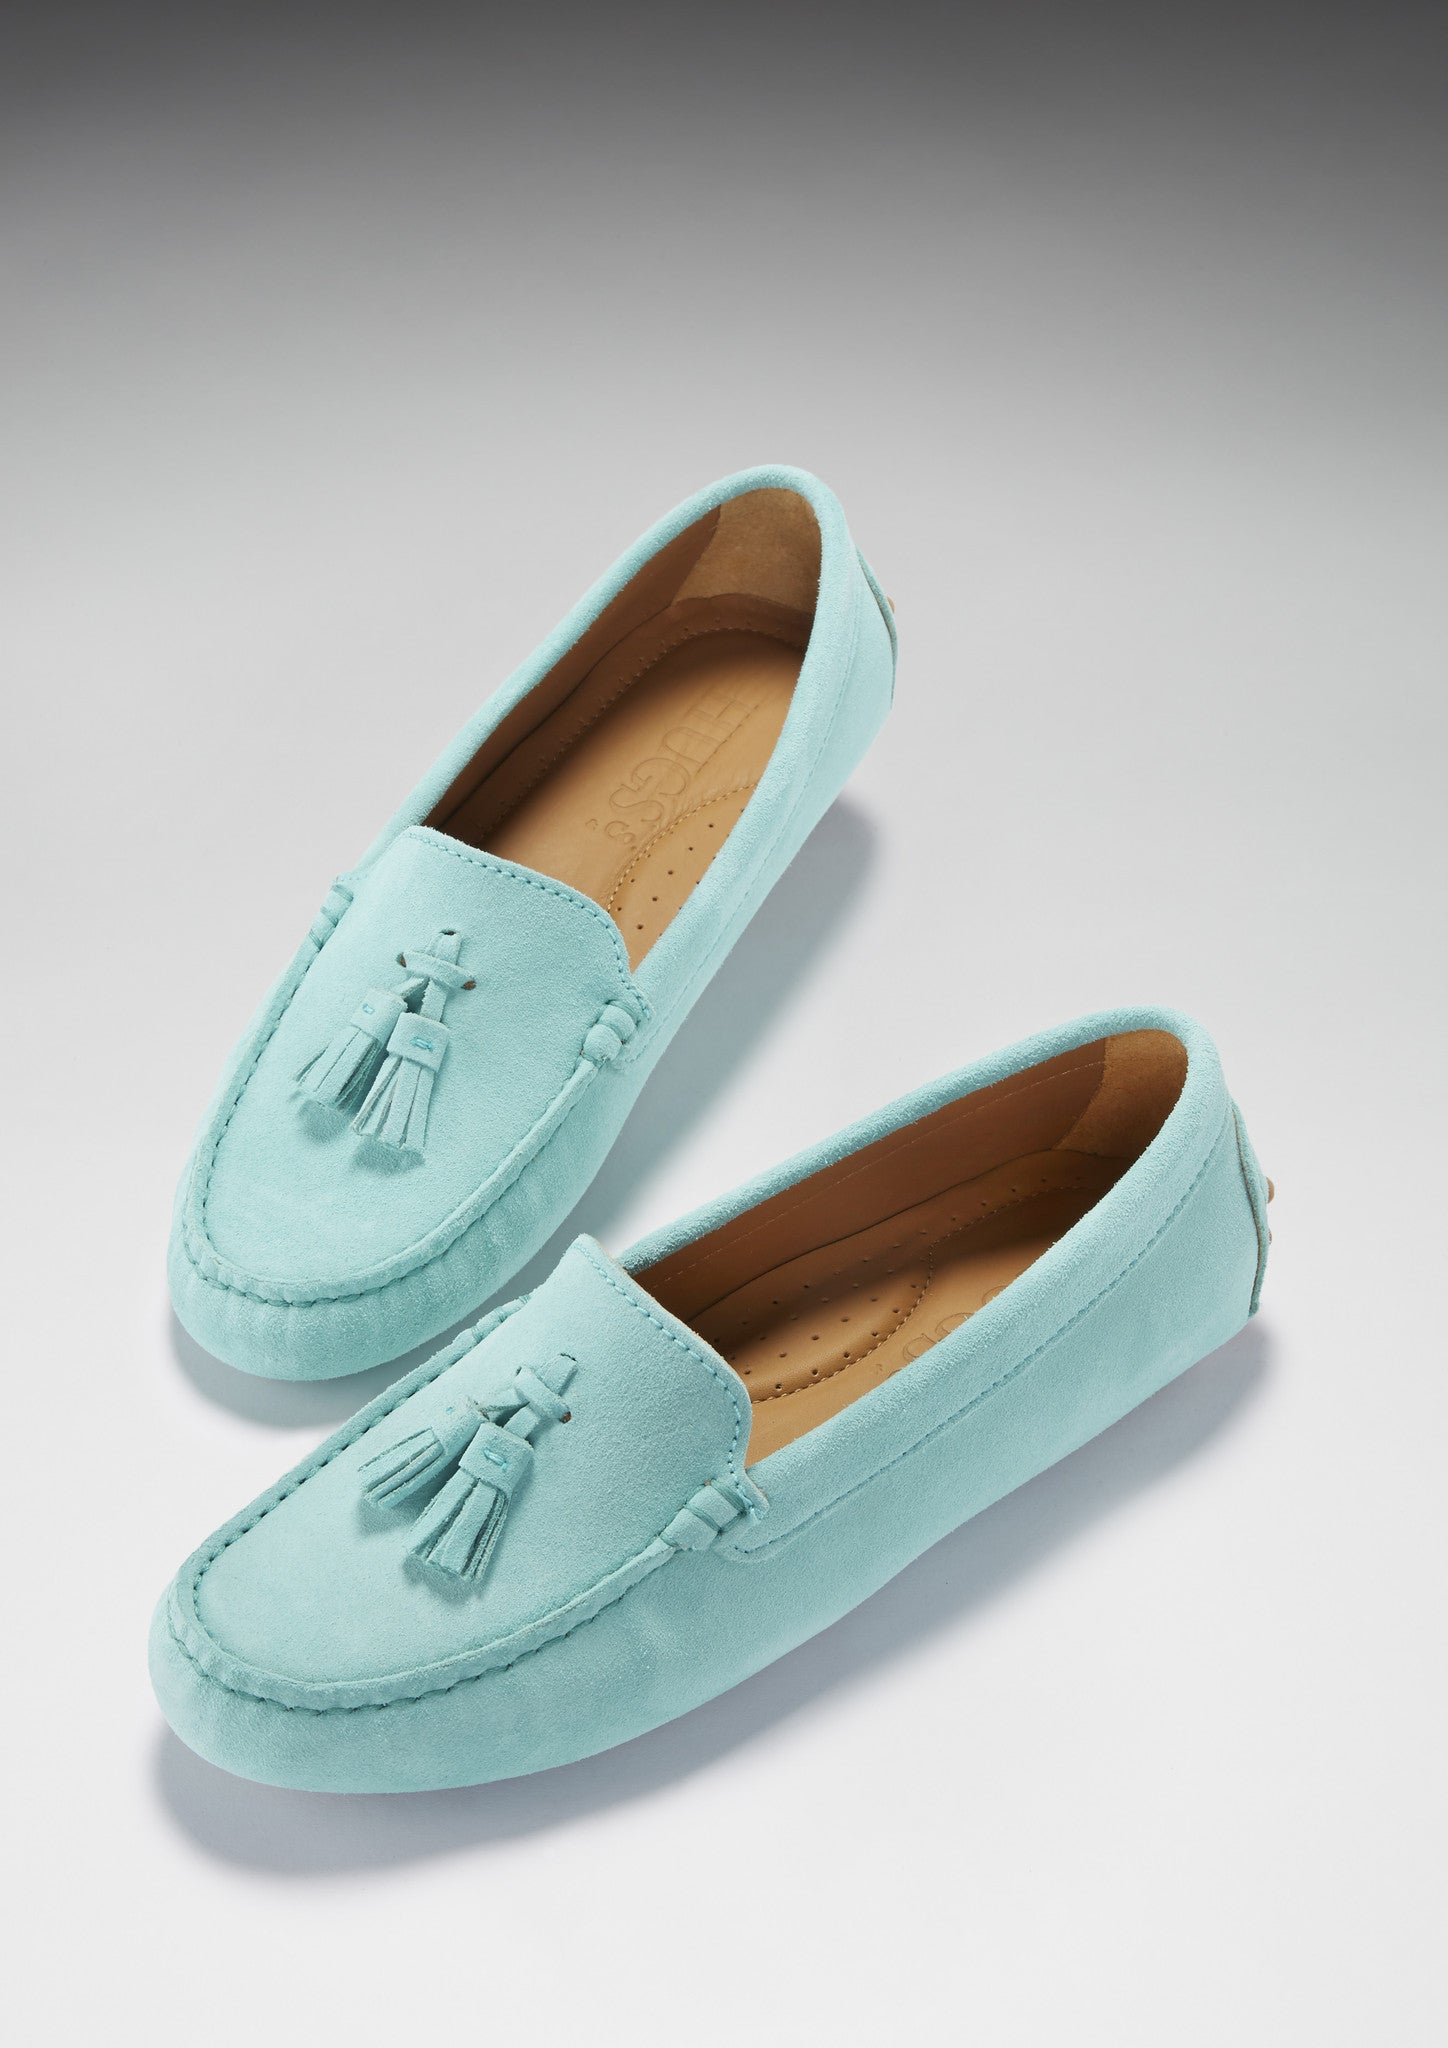 Women's Tasselled Driving Loafers, aqua suede